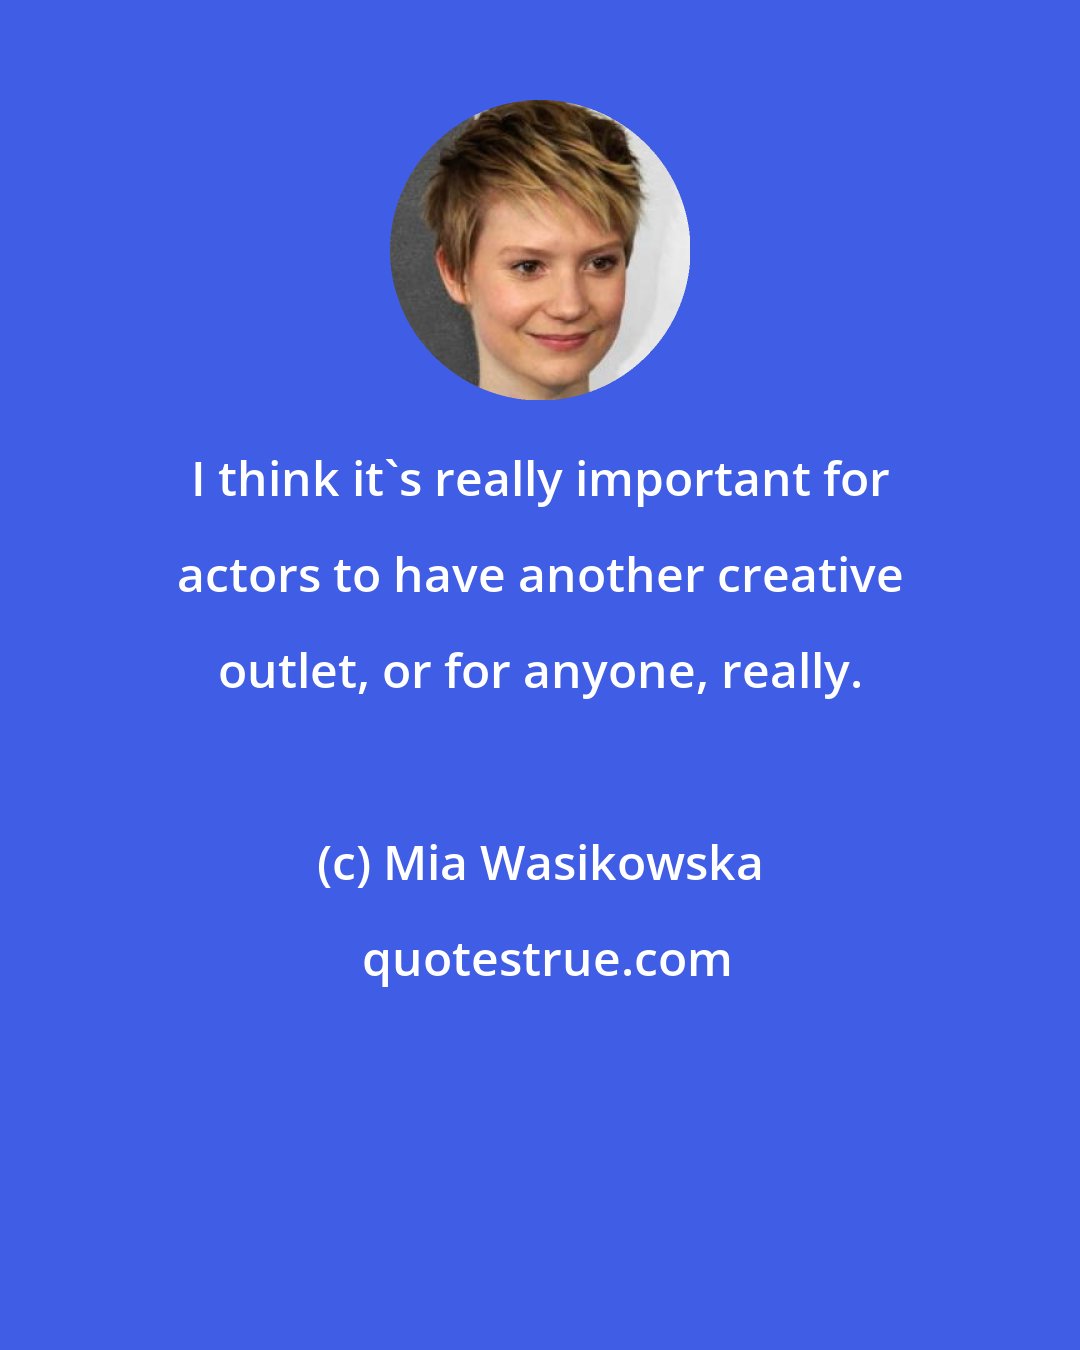 Mia Wasikowska: I think it's really important for actors to have another creative outlet, or for anyone, really.